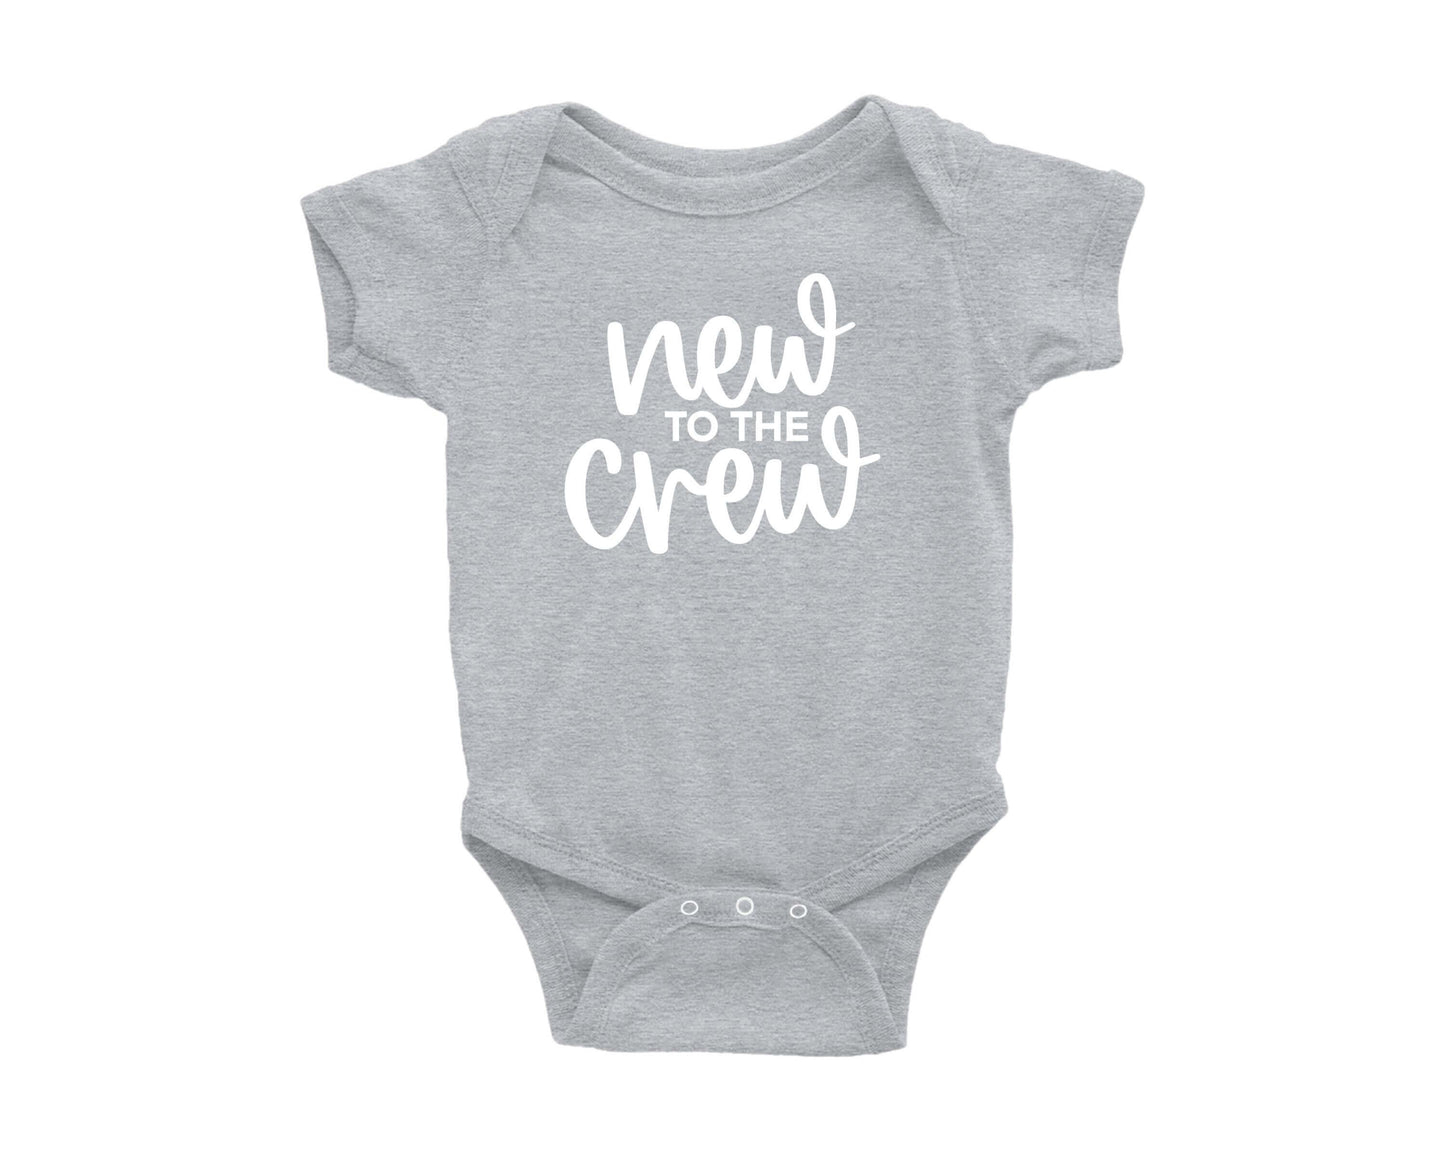 New to the Crew Onesie - Crystal Rose Design Co.